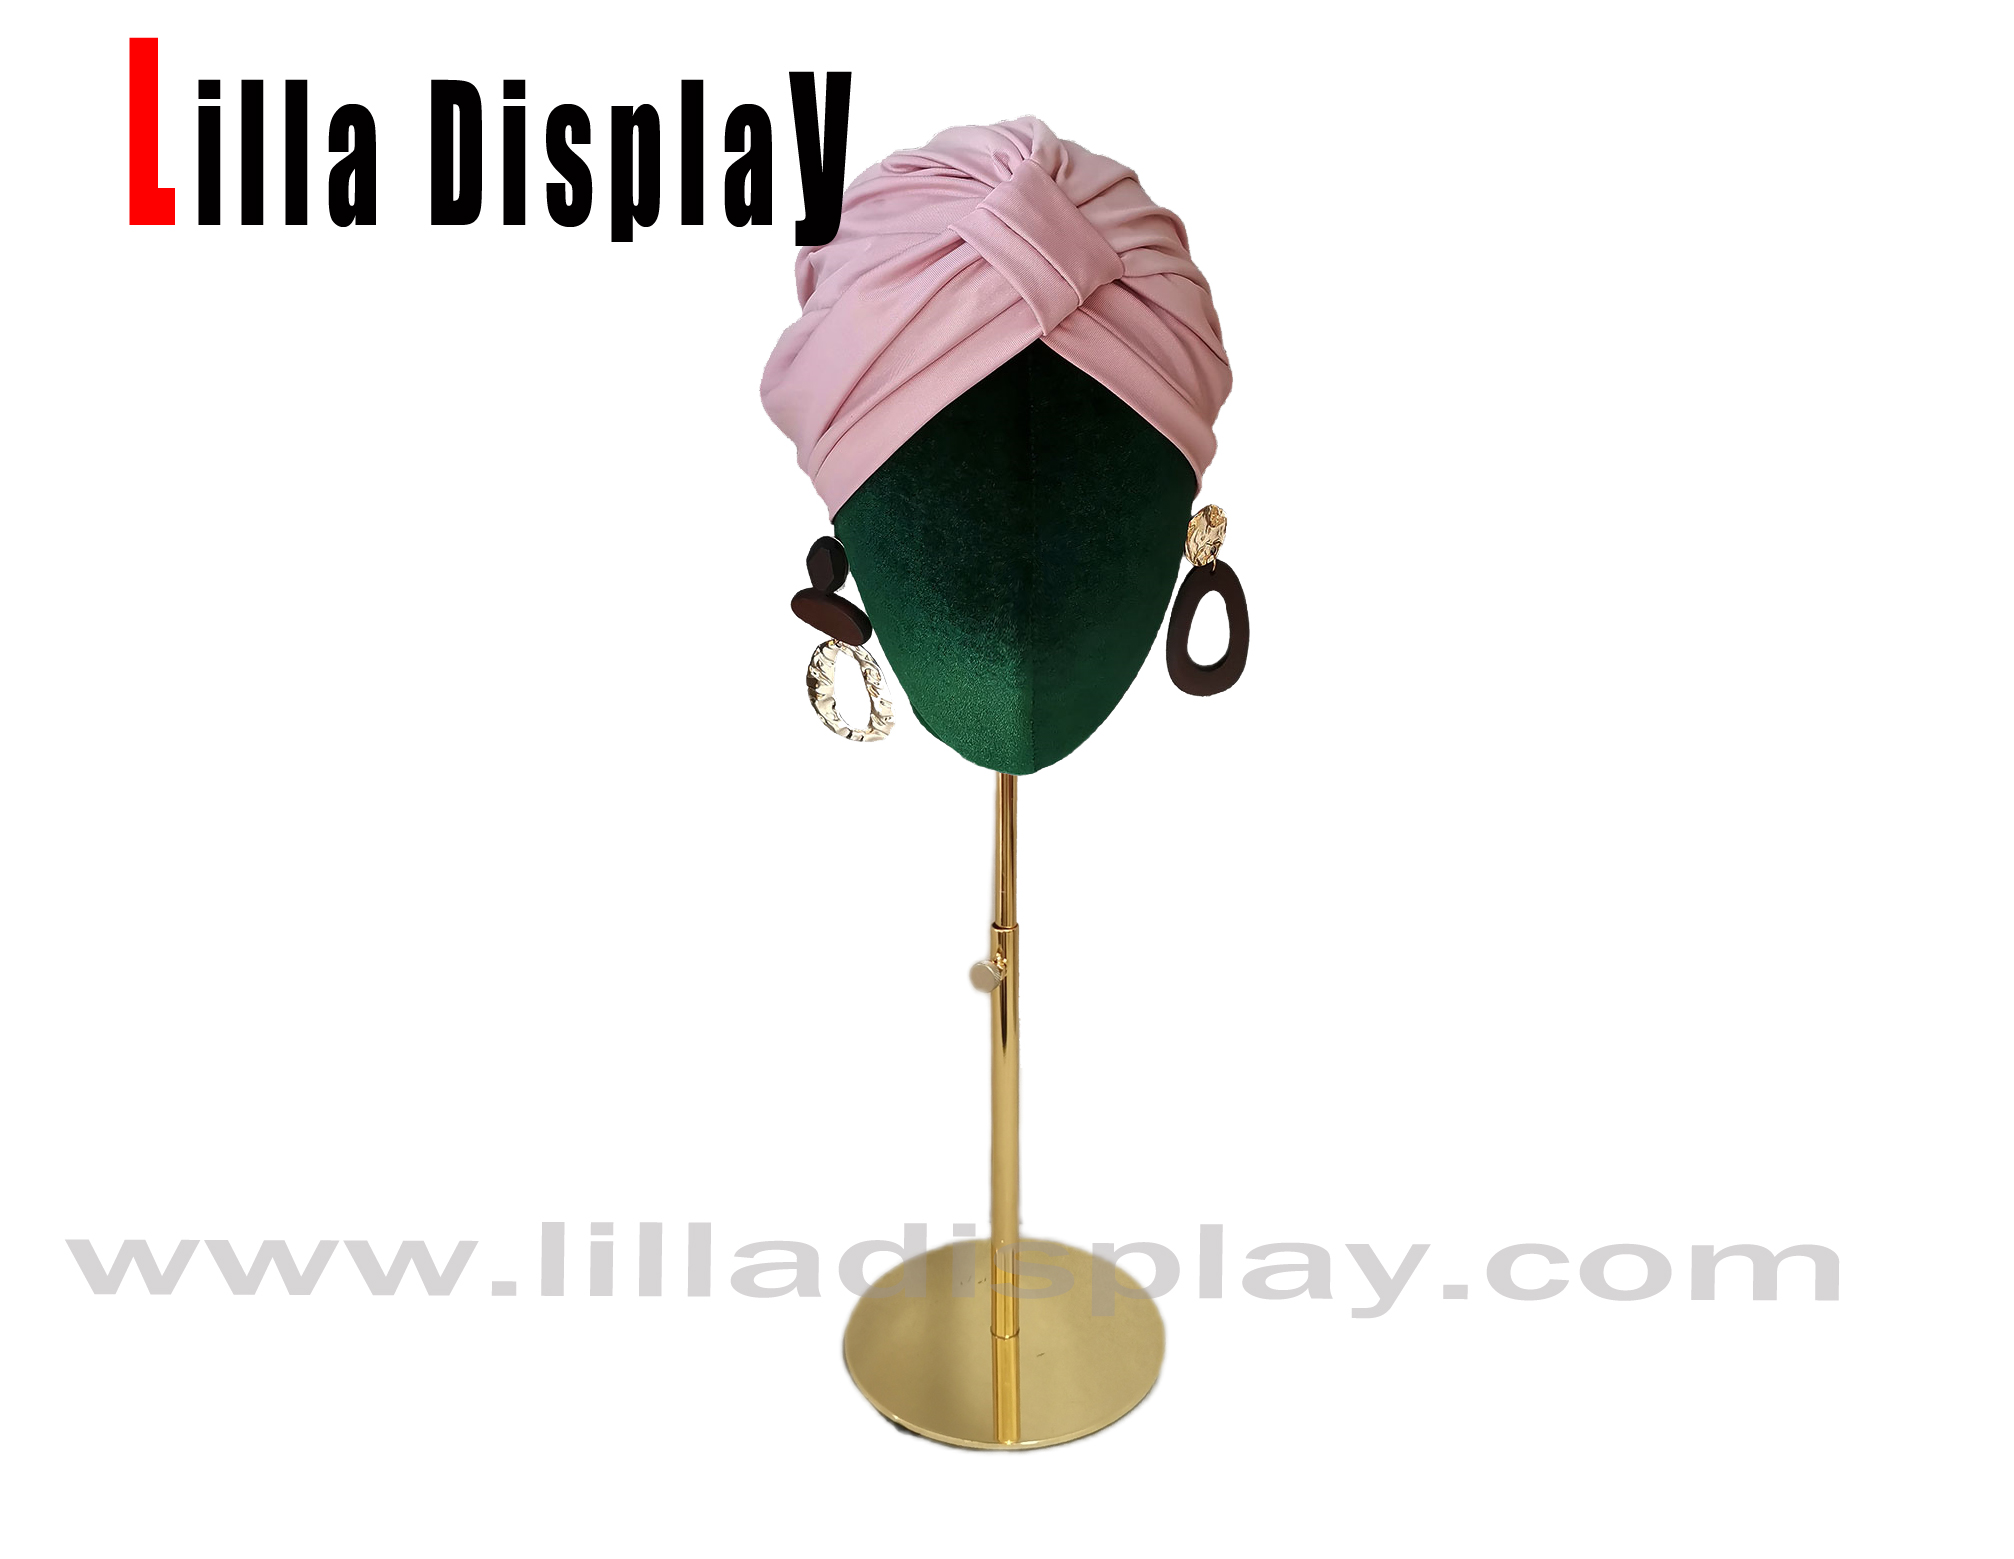 lilladisplay 38usd faceless 99 colors female mannequin lucy on sale